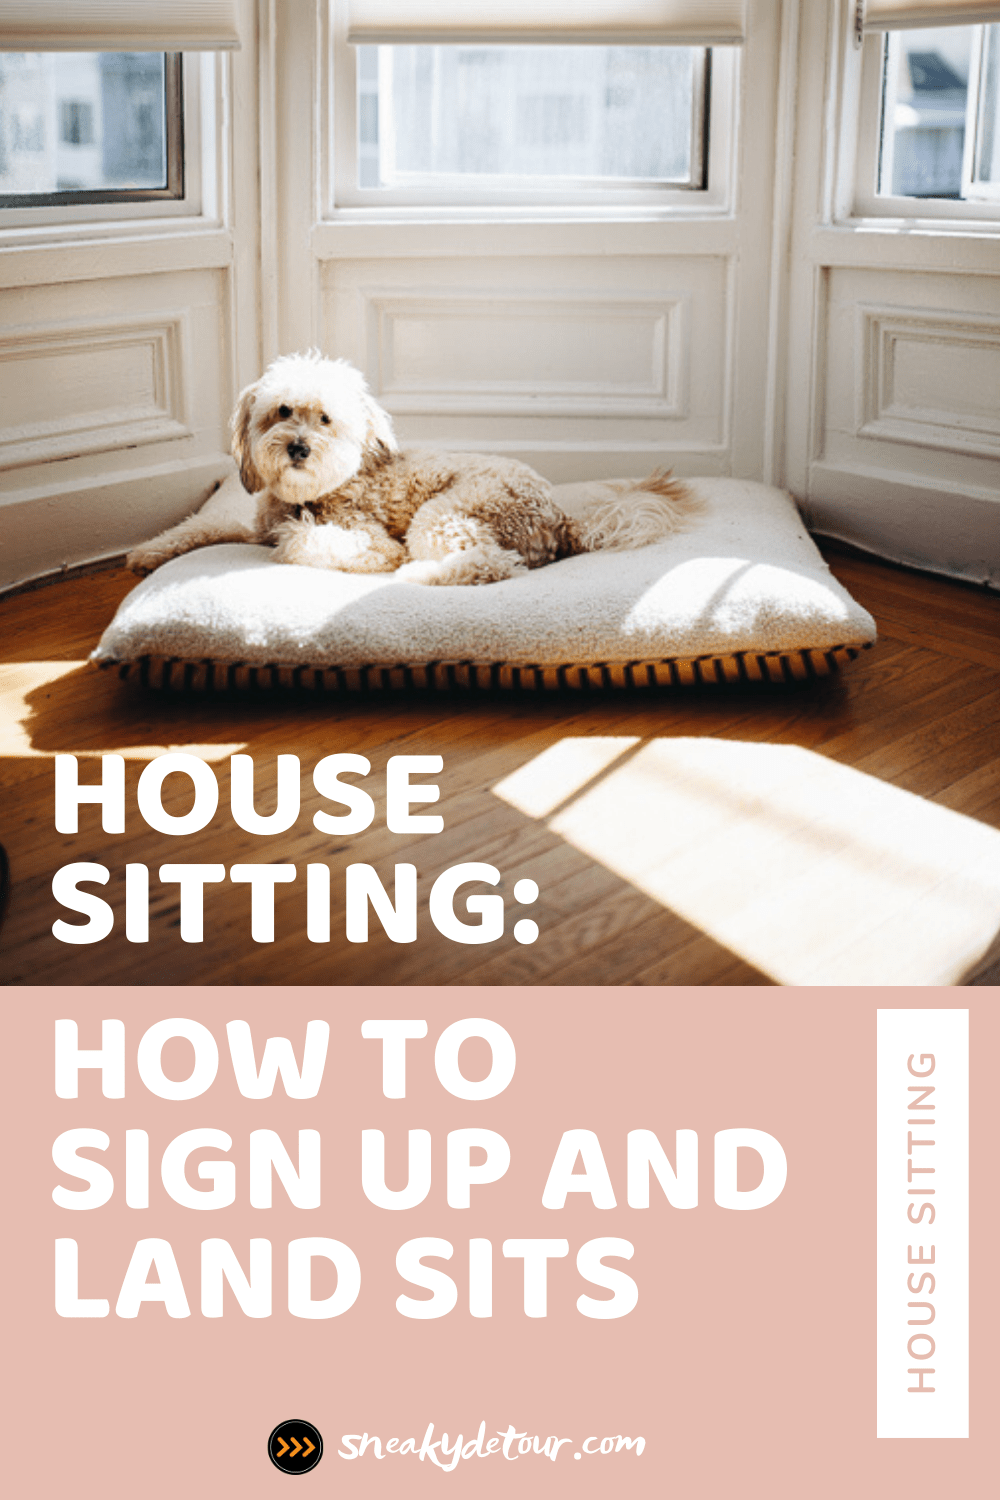 How to housesit a house temporaly that is up for sale and is not selling